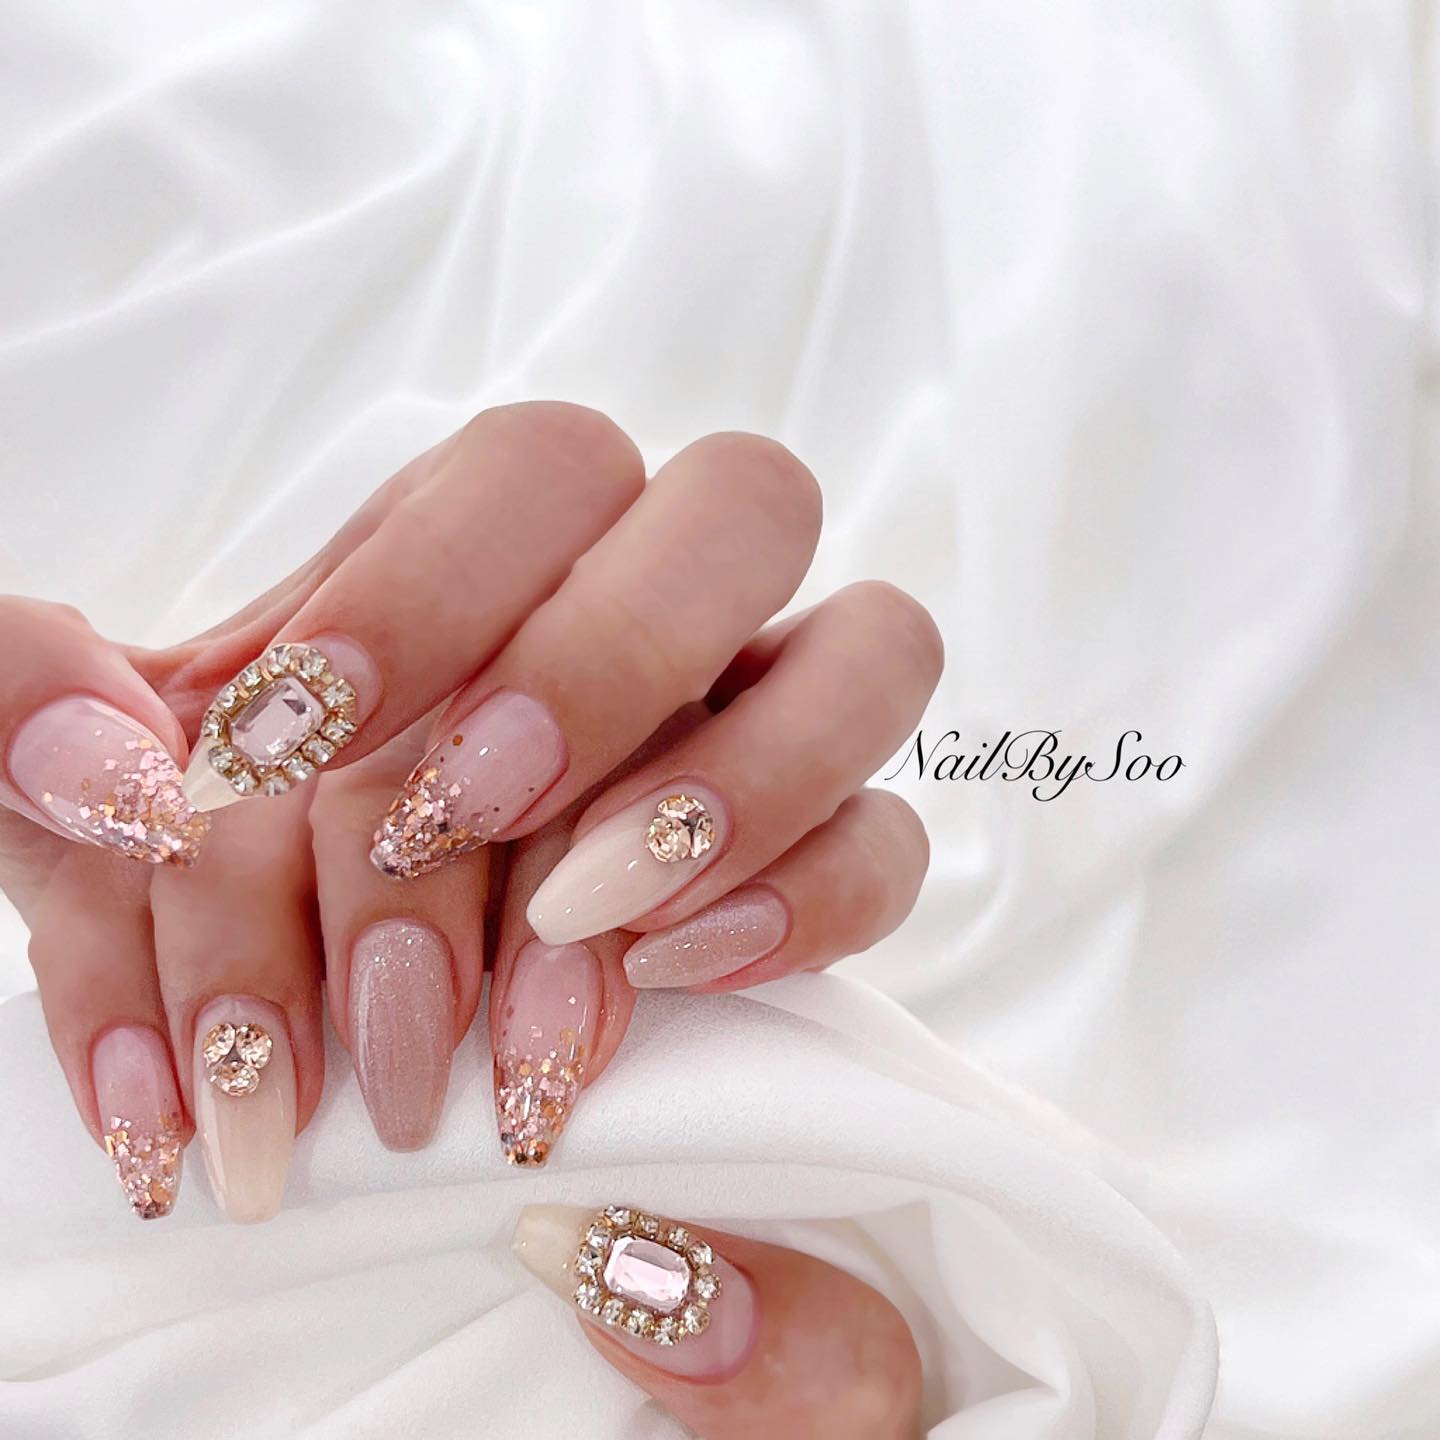 If you think that your wedding ring is not enough, why don't you decorate your nails with shiny and glamorous stones as a nail art? Let's get them on your nude and glittered nails to shine more.